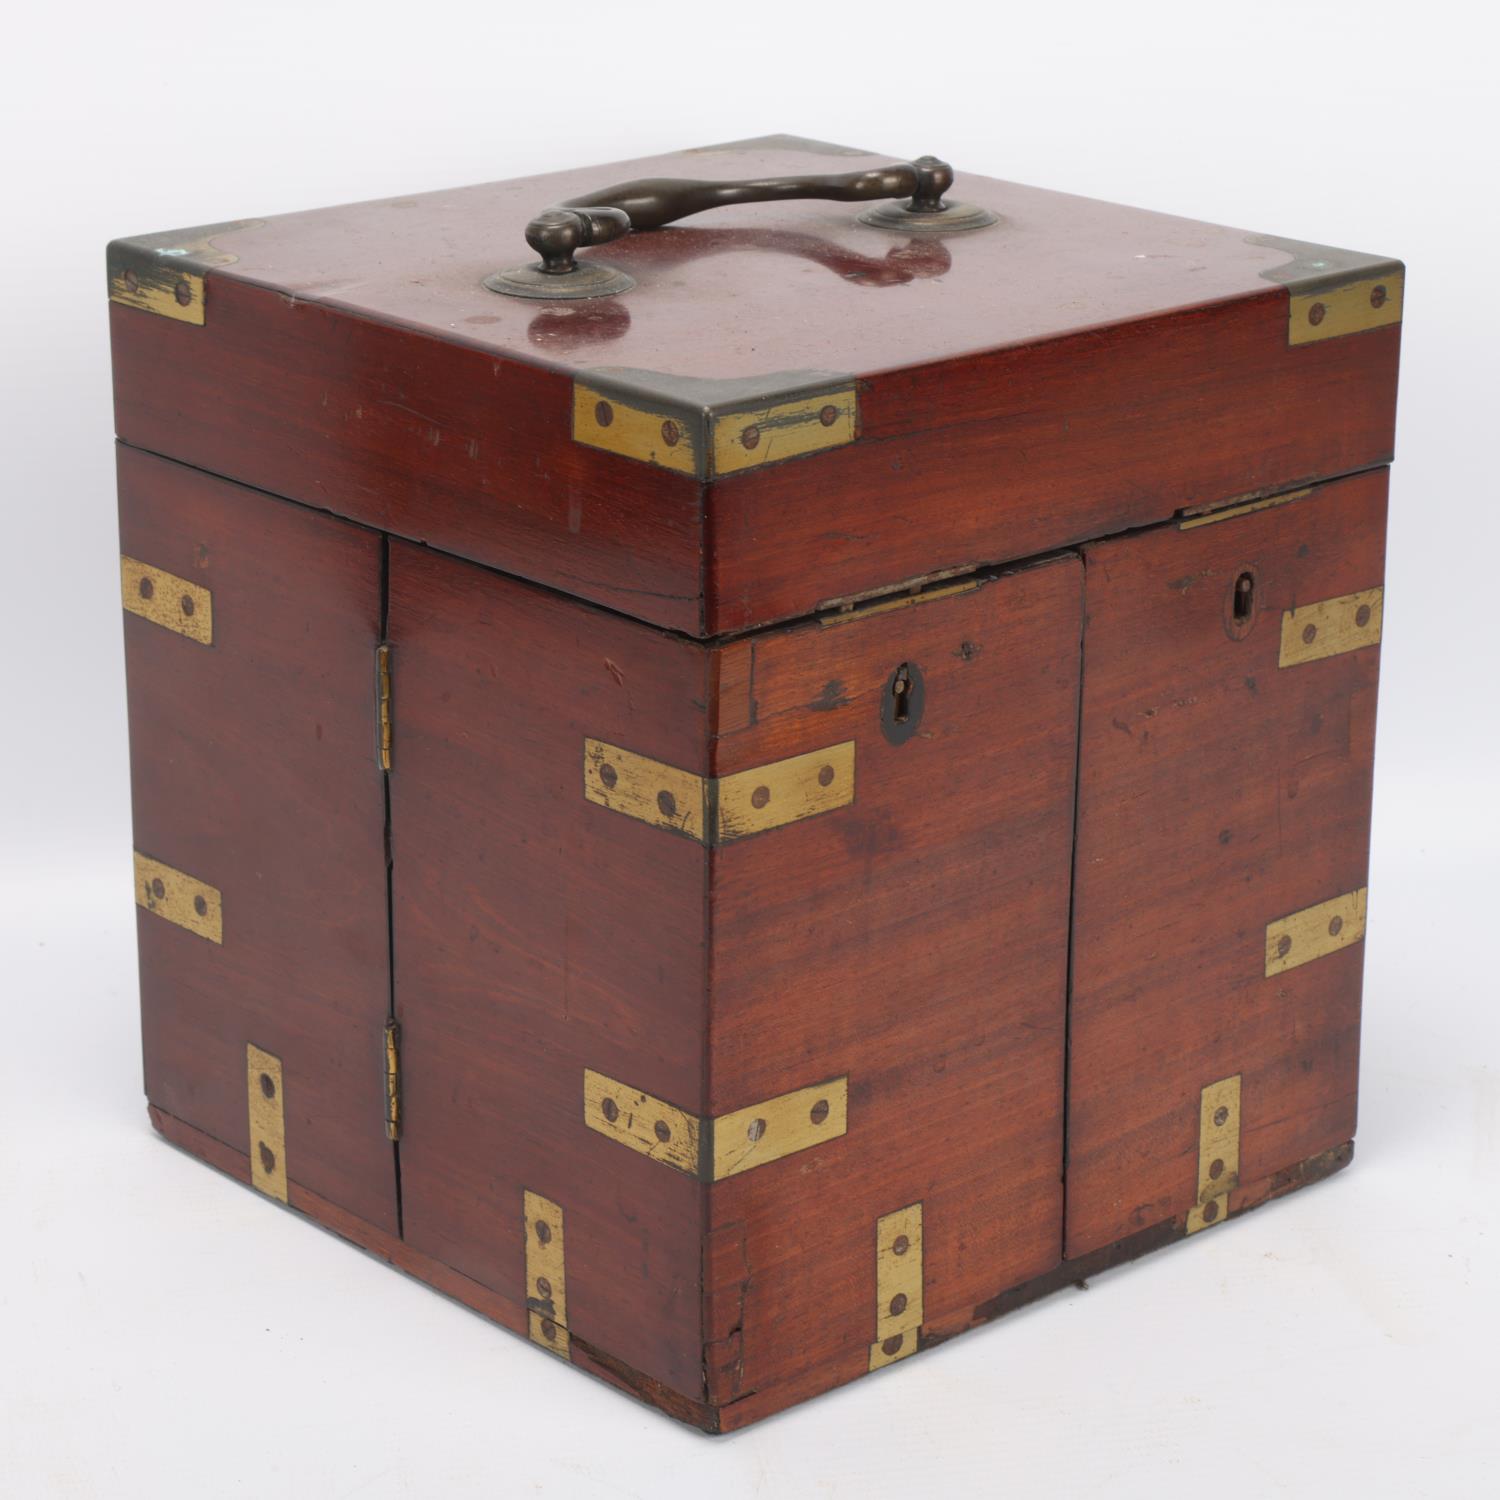 A 19th century brass-bound mahogany travelling apothecary cabinet, with hinged lid and doors opening - Image 3 of 3